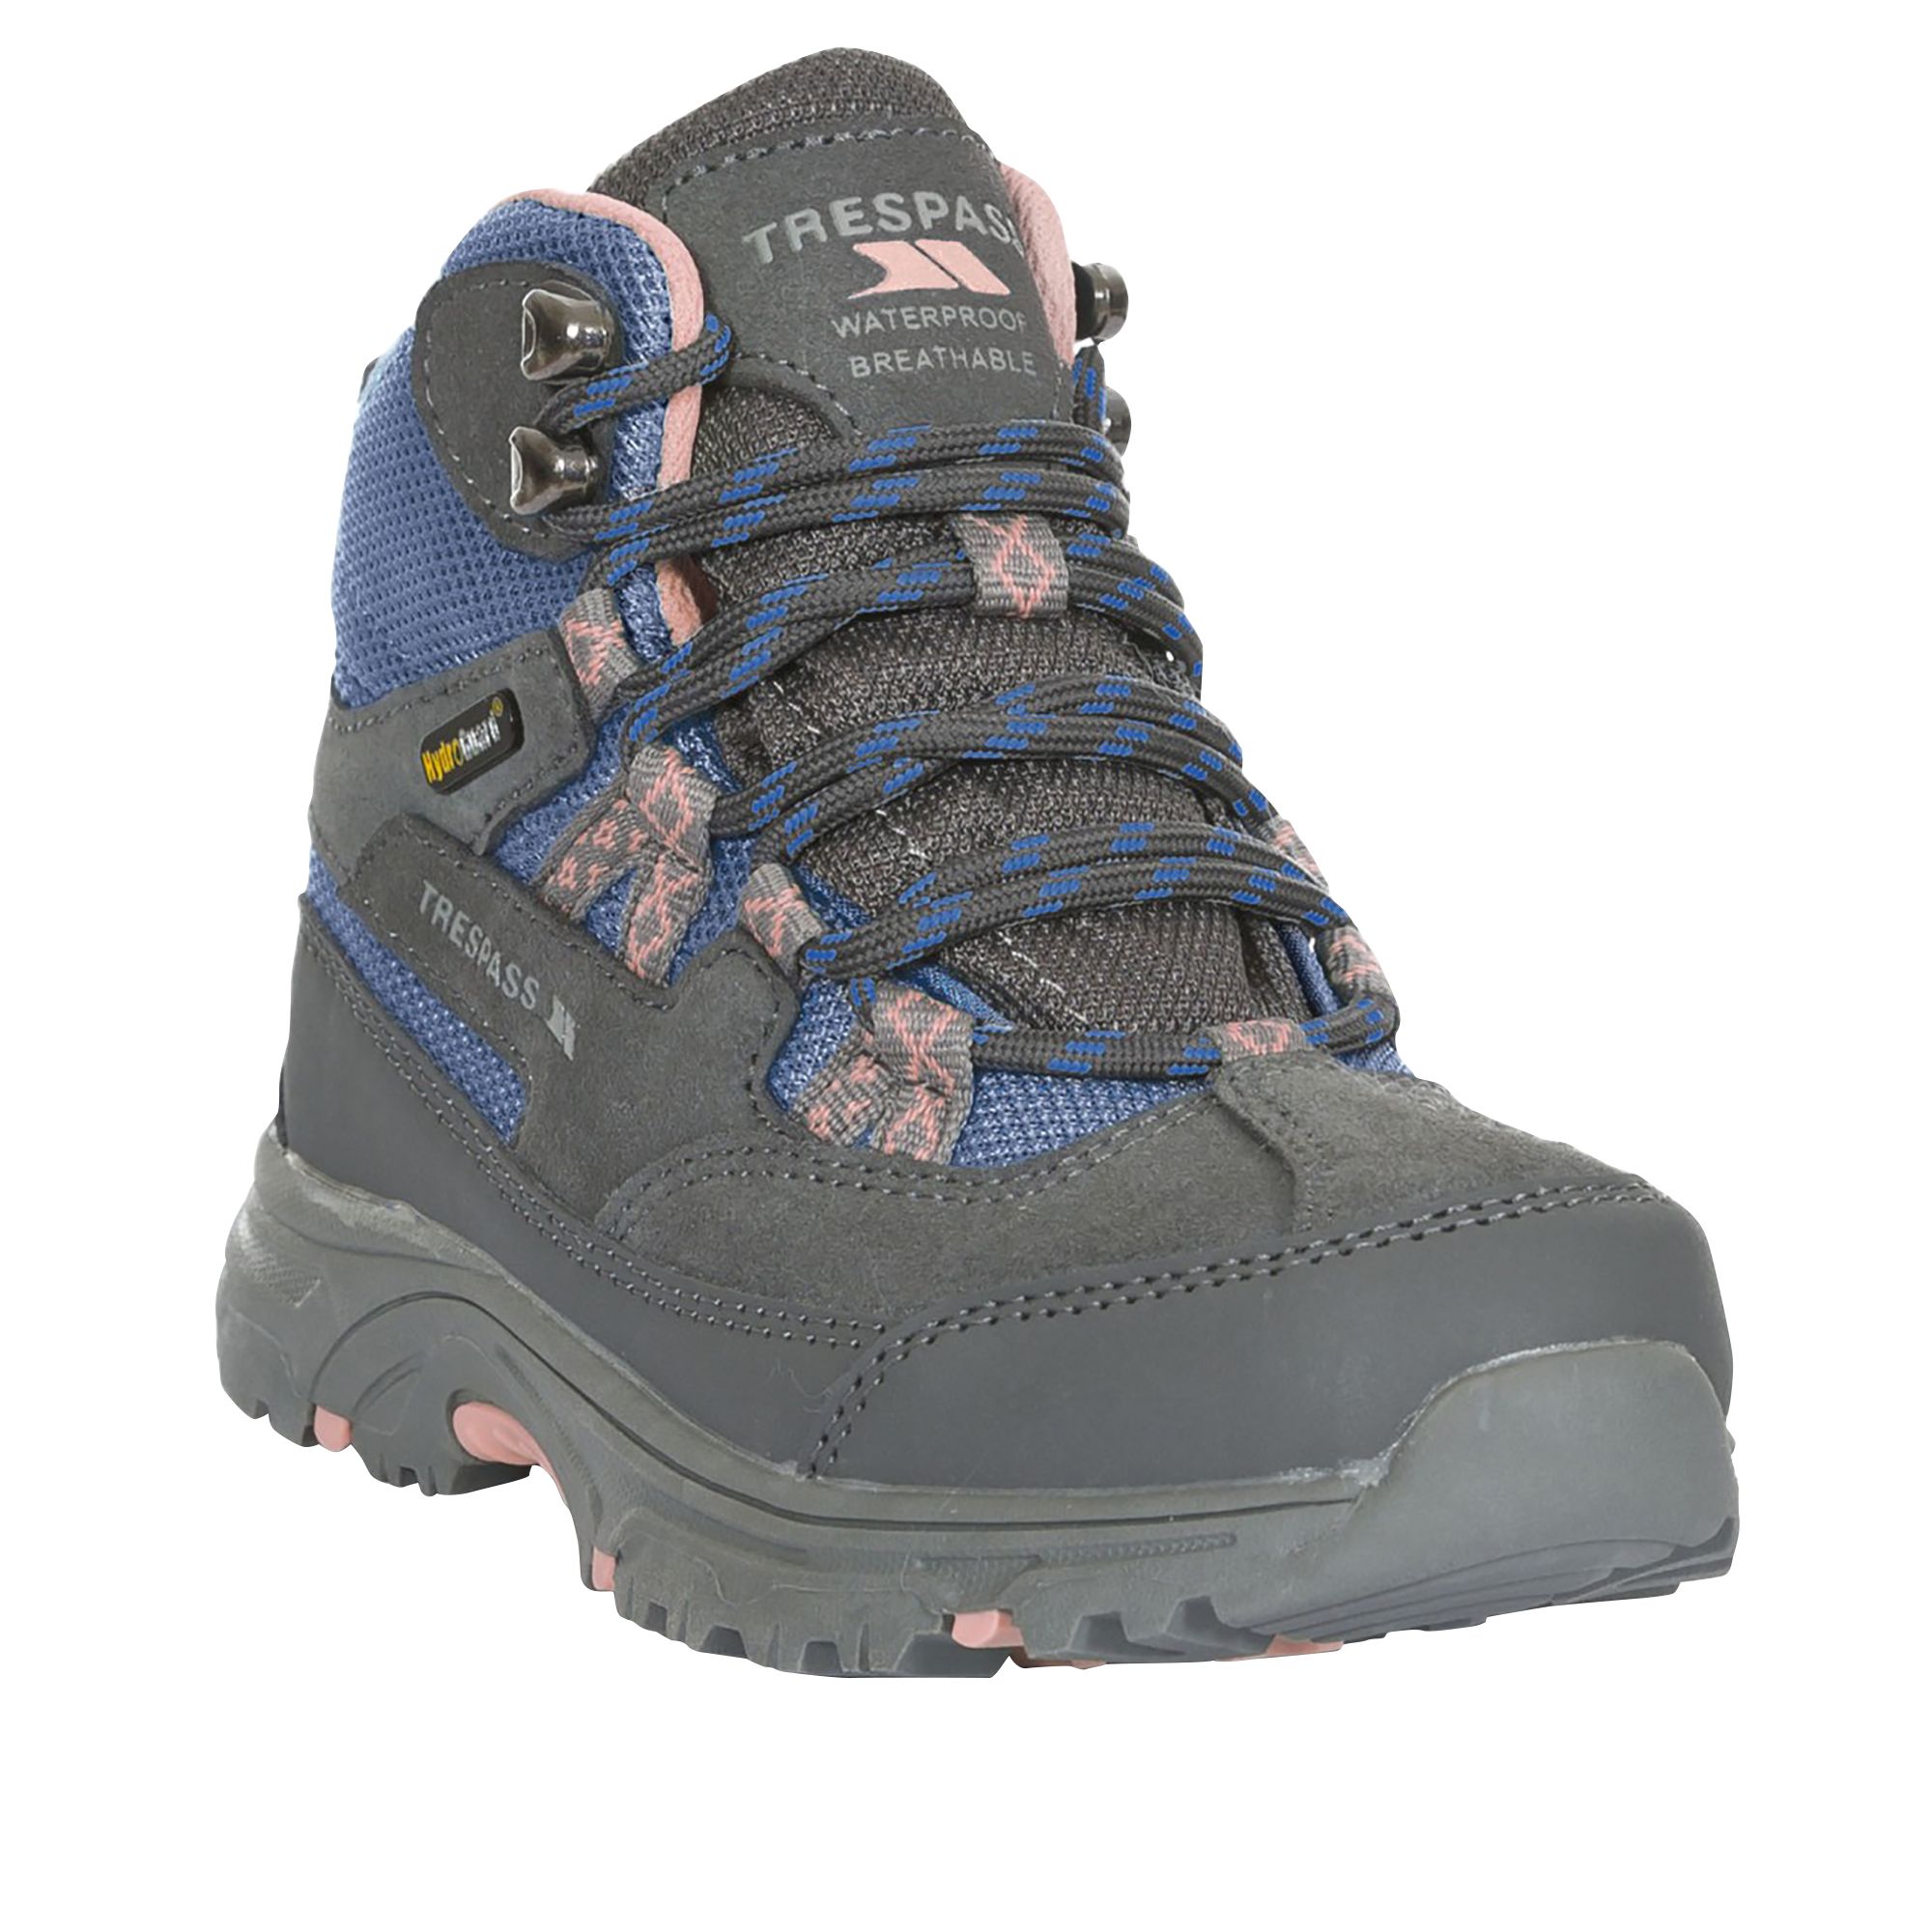 Trail mid cut boot. Waterproof and breathable membrane. Gusseted tongue. Protective and durable all-round mudguard. Ankle supportive cushioned collar and tongue. Arch stabilising and supportive shank. Cushioned and moulded footbed. Durable traction outsole. Upper: Suede/PU/Mesh, Lining: Textile, Insole: EVA, Outsole: TPR.